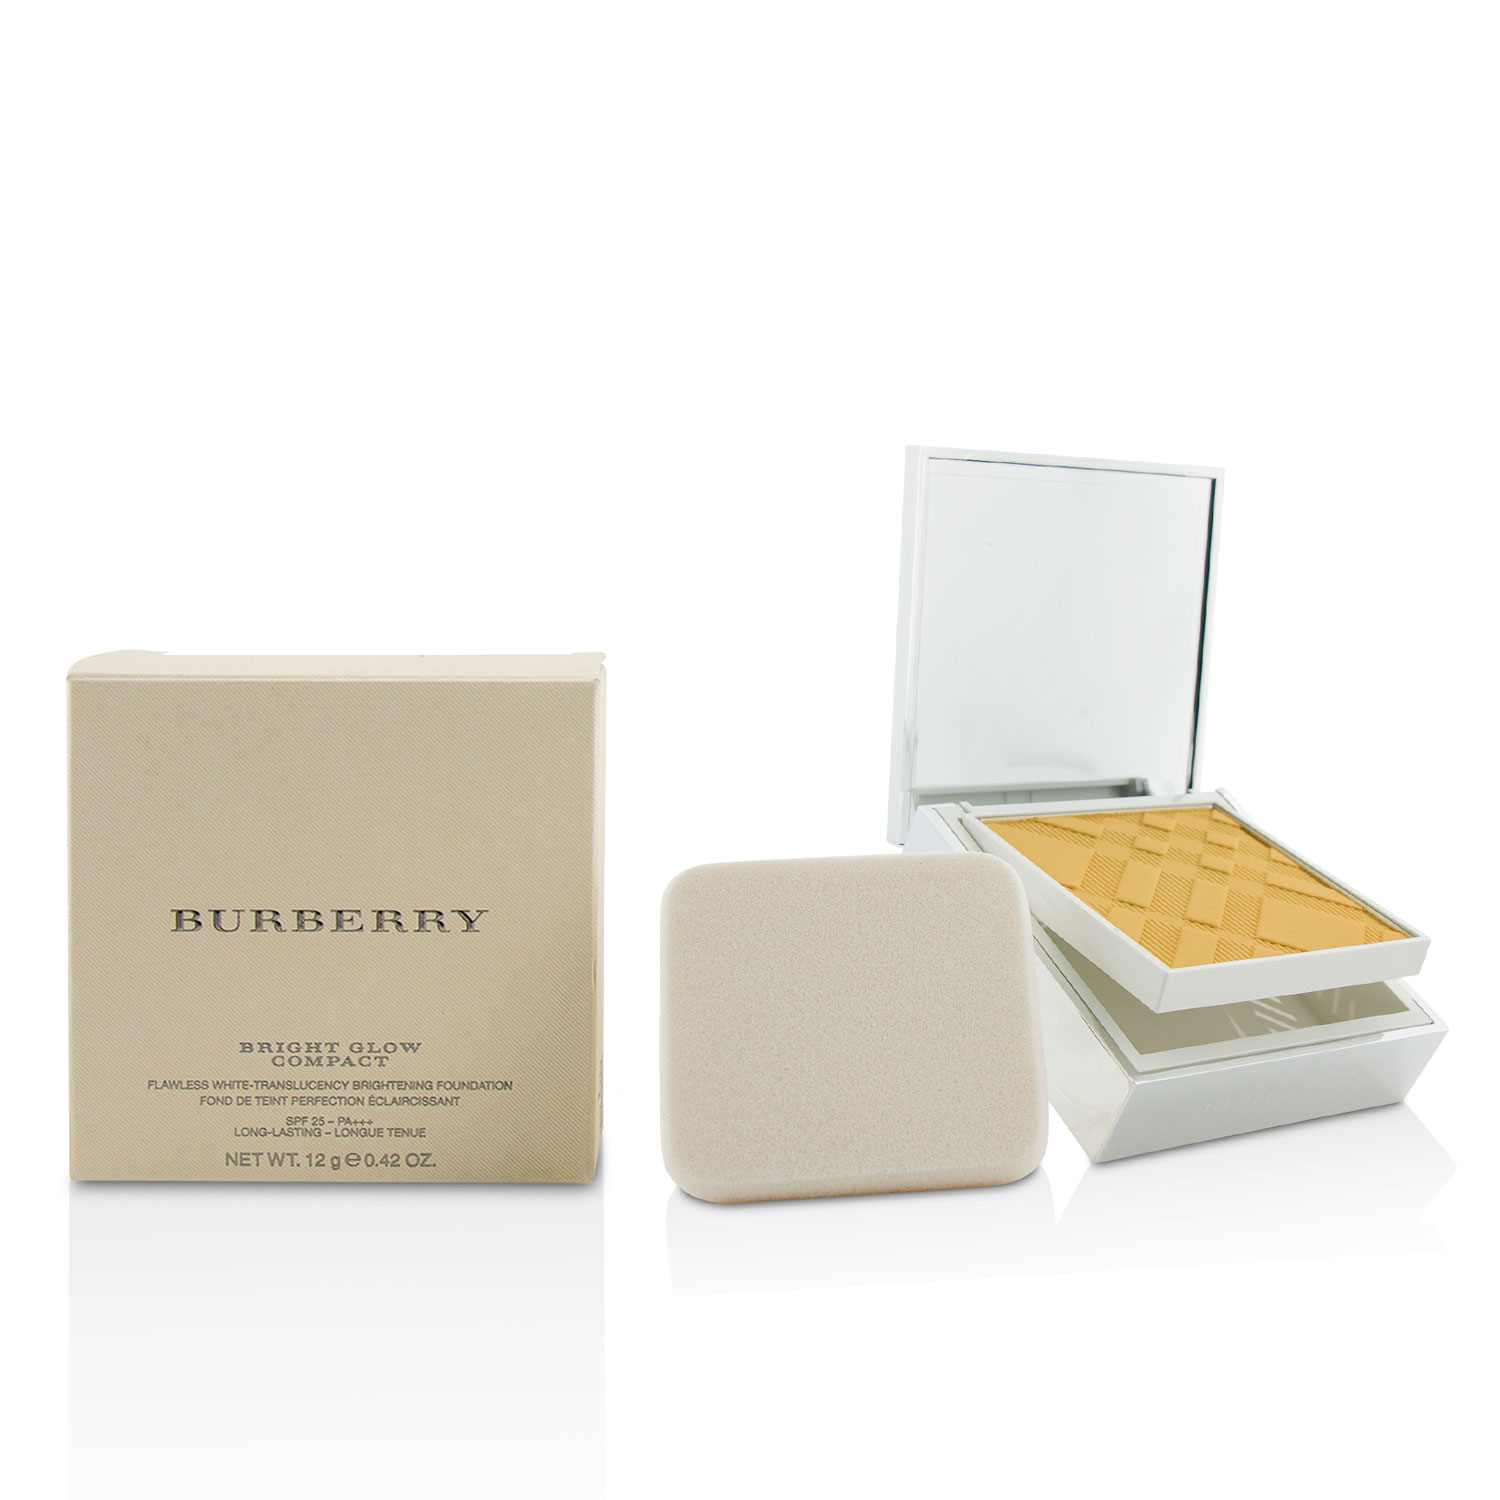 Bright Glow Flawless White Translucency Brightening Compact Foundation SPF 25 - # No. 20 Orche Burberry Image